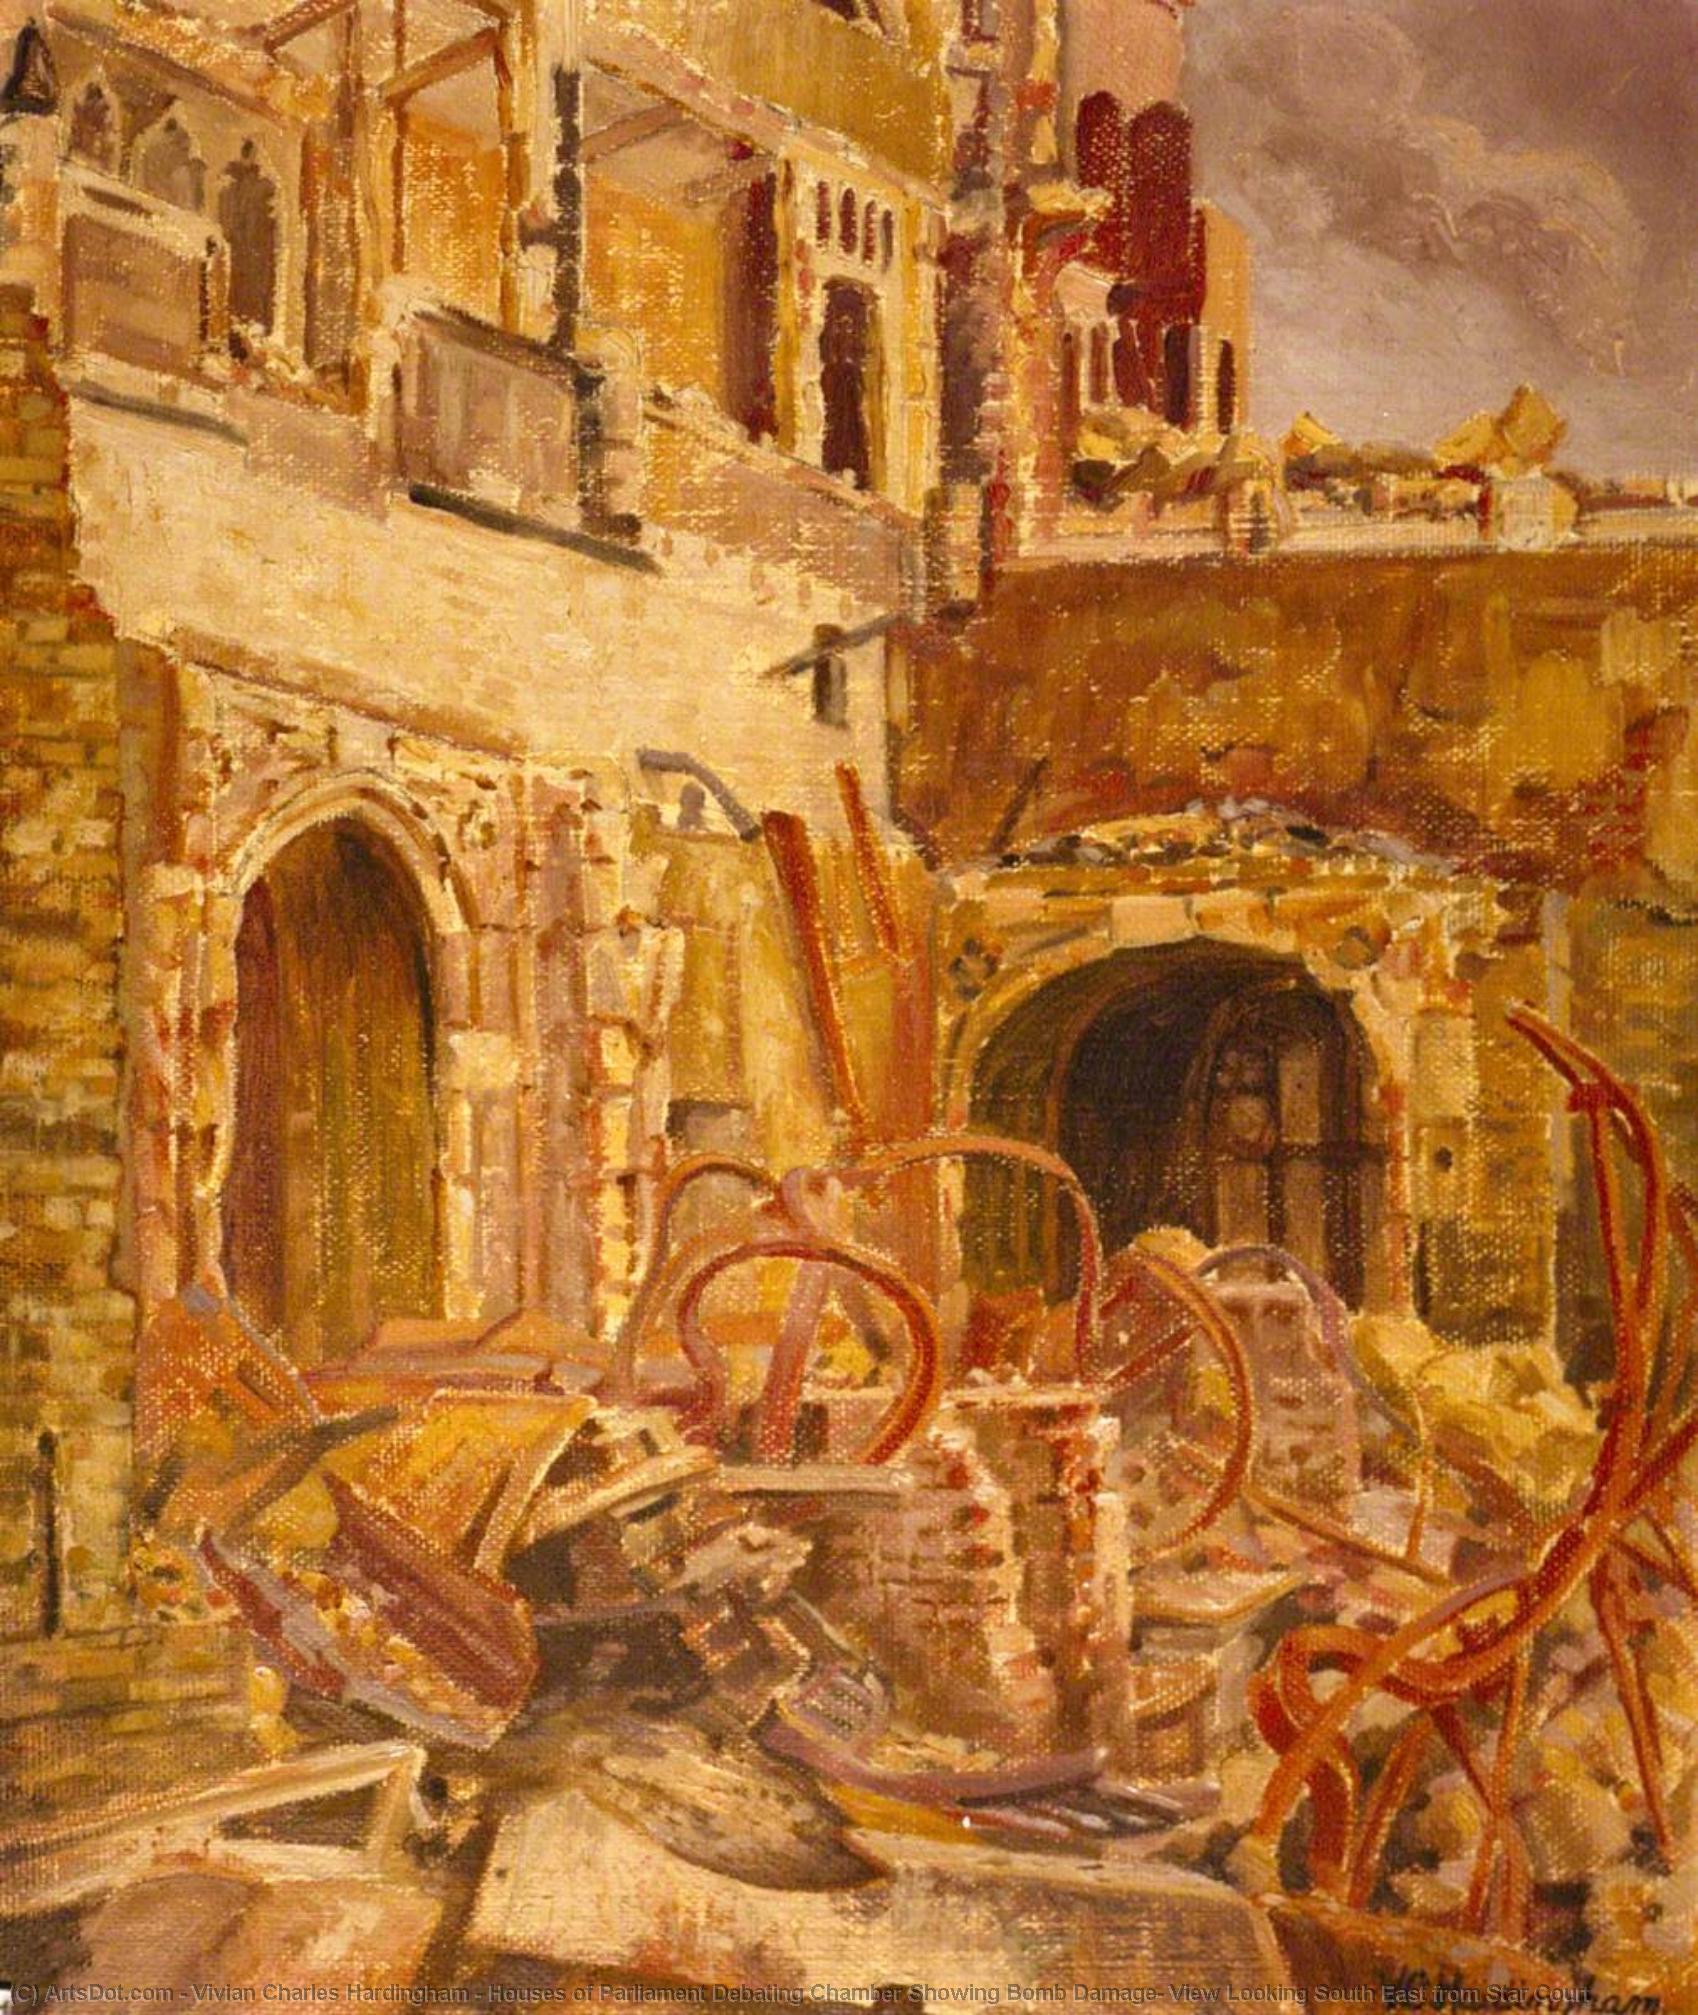 Order Art Reproductions Houses of Parliament Debating Chamber Showing Bomb Damage, View Looking South East from Star Court, 1941 by Vivian Charles Hardingham (Inspired By) (1893-1972) | ArtsDot.com